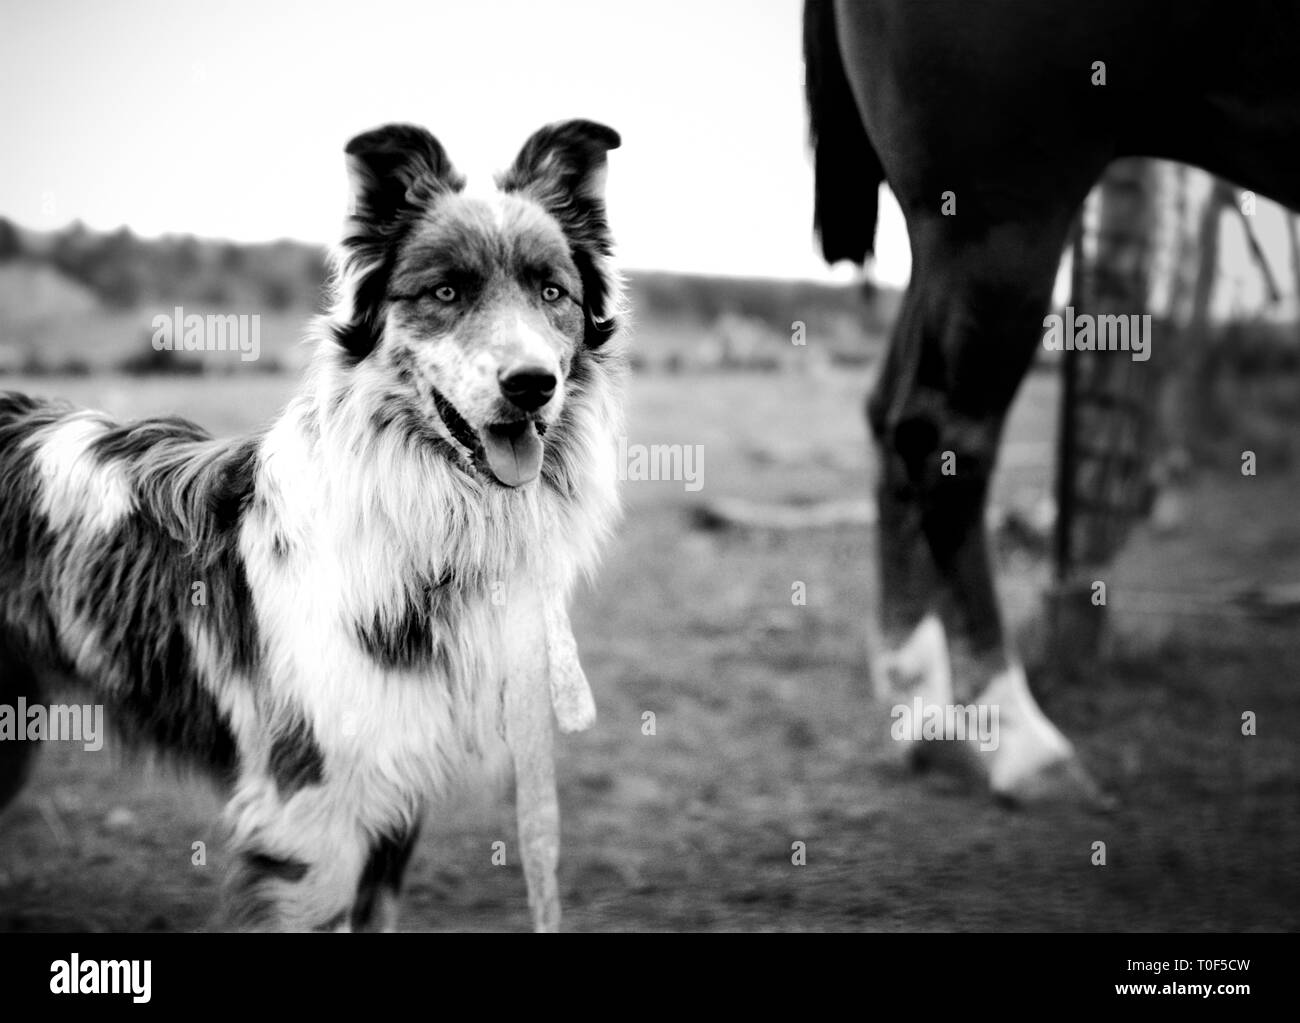 Close-up of dog in paddock with horse Stock Photo